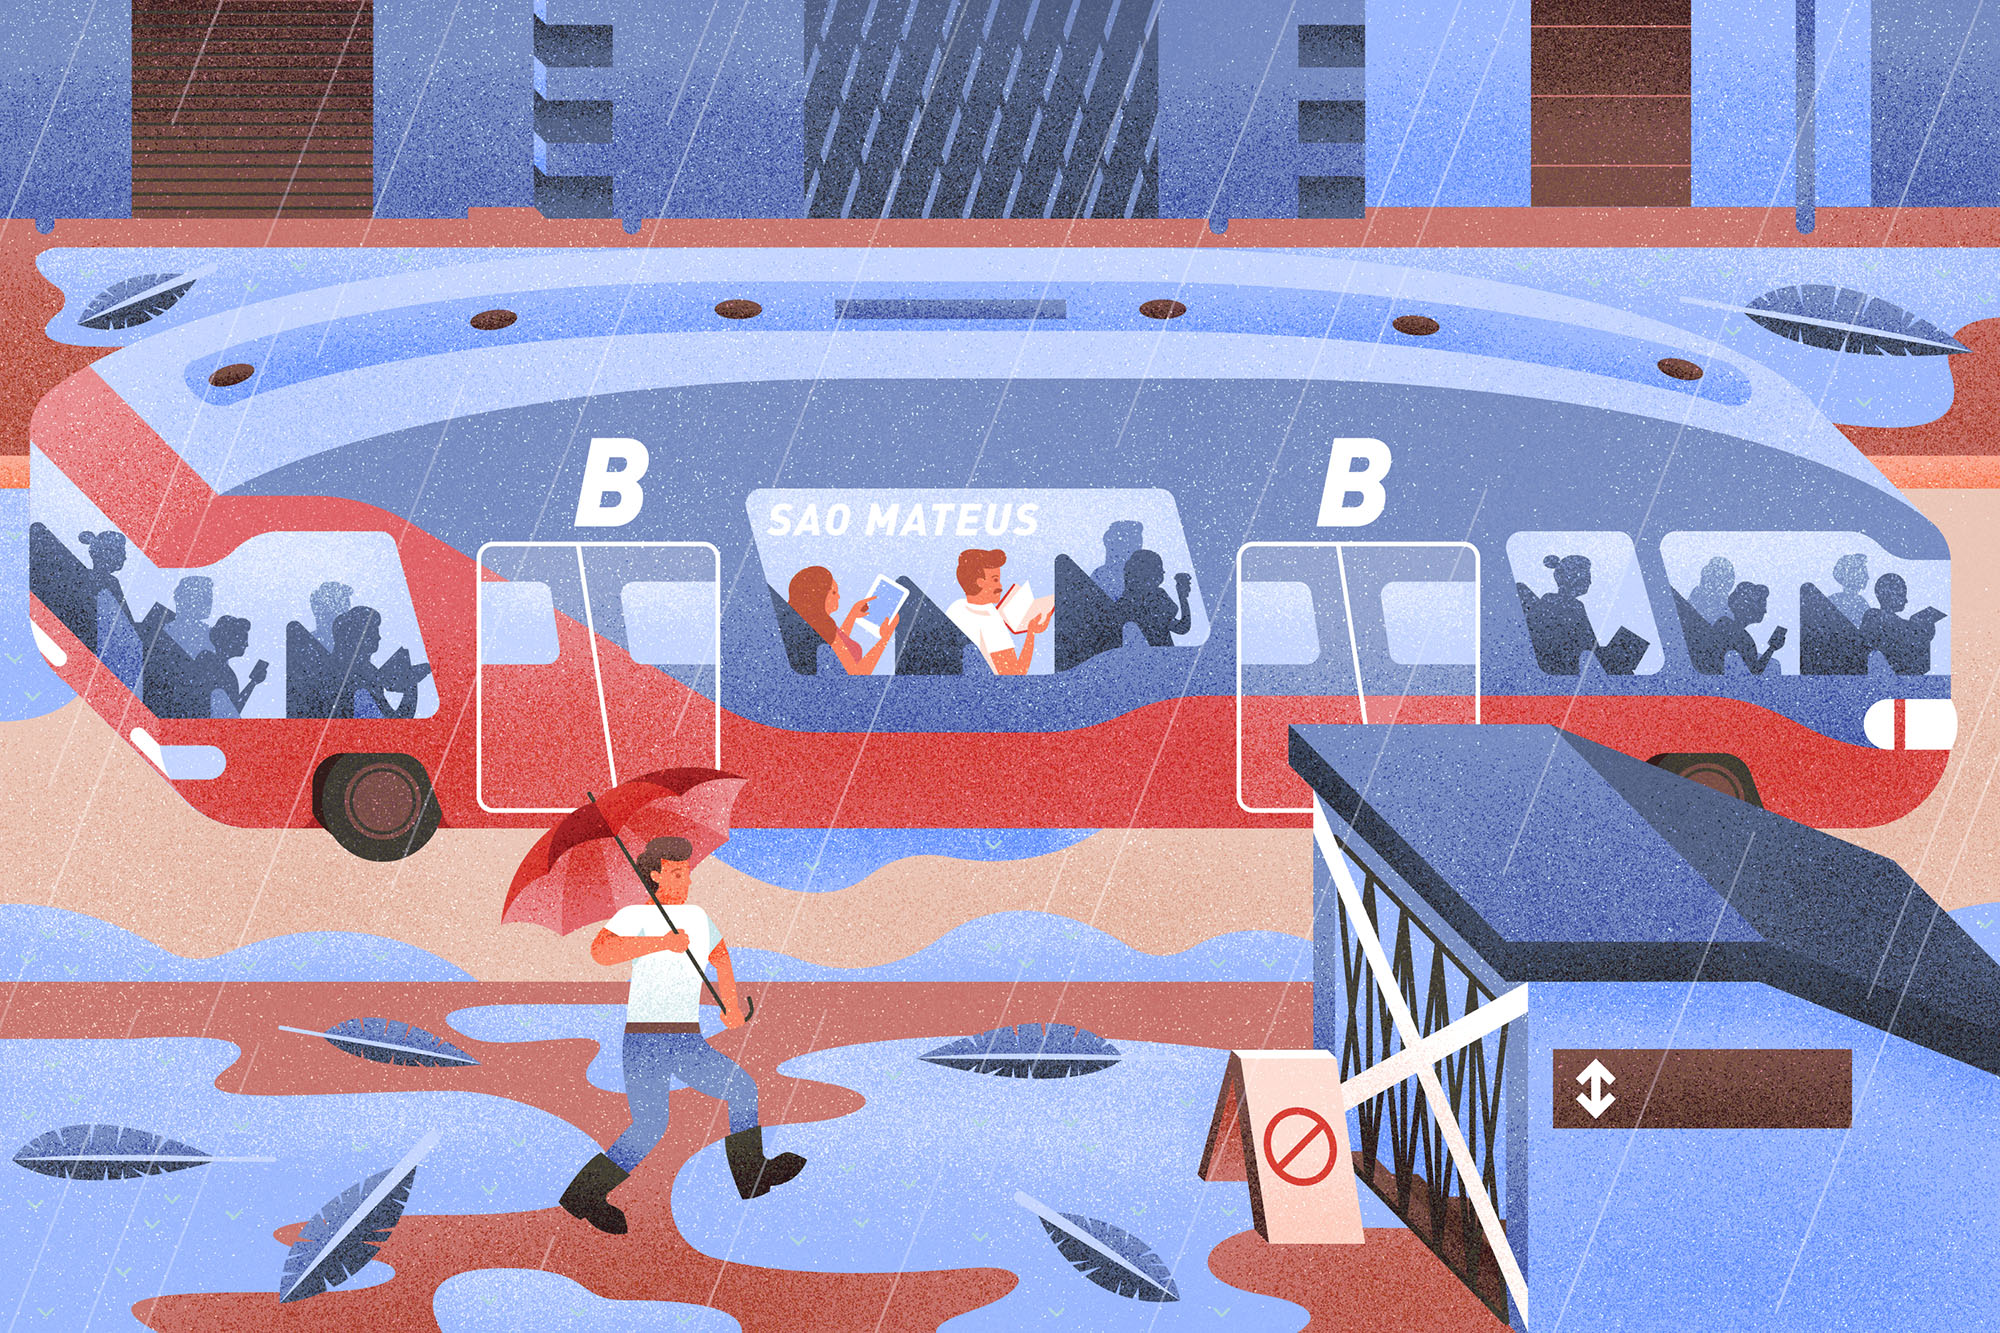 They’re flexible too. When a flood hit last year and knocked out half the subways in the city, Jorge didn’t miss a day of work because software trains could easily be redeployed to avoid disruptions.